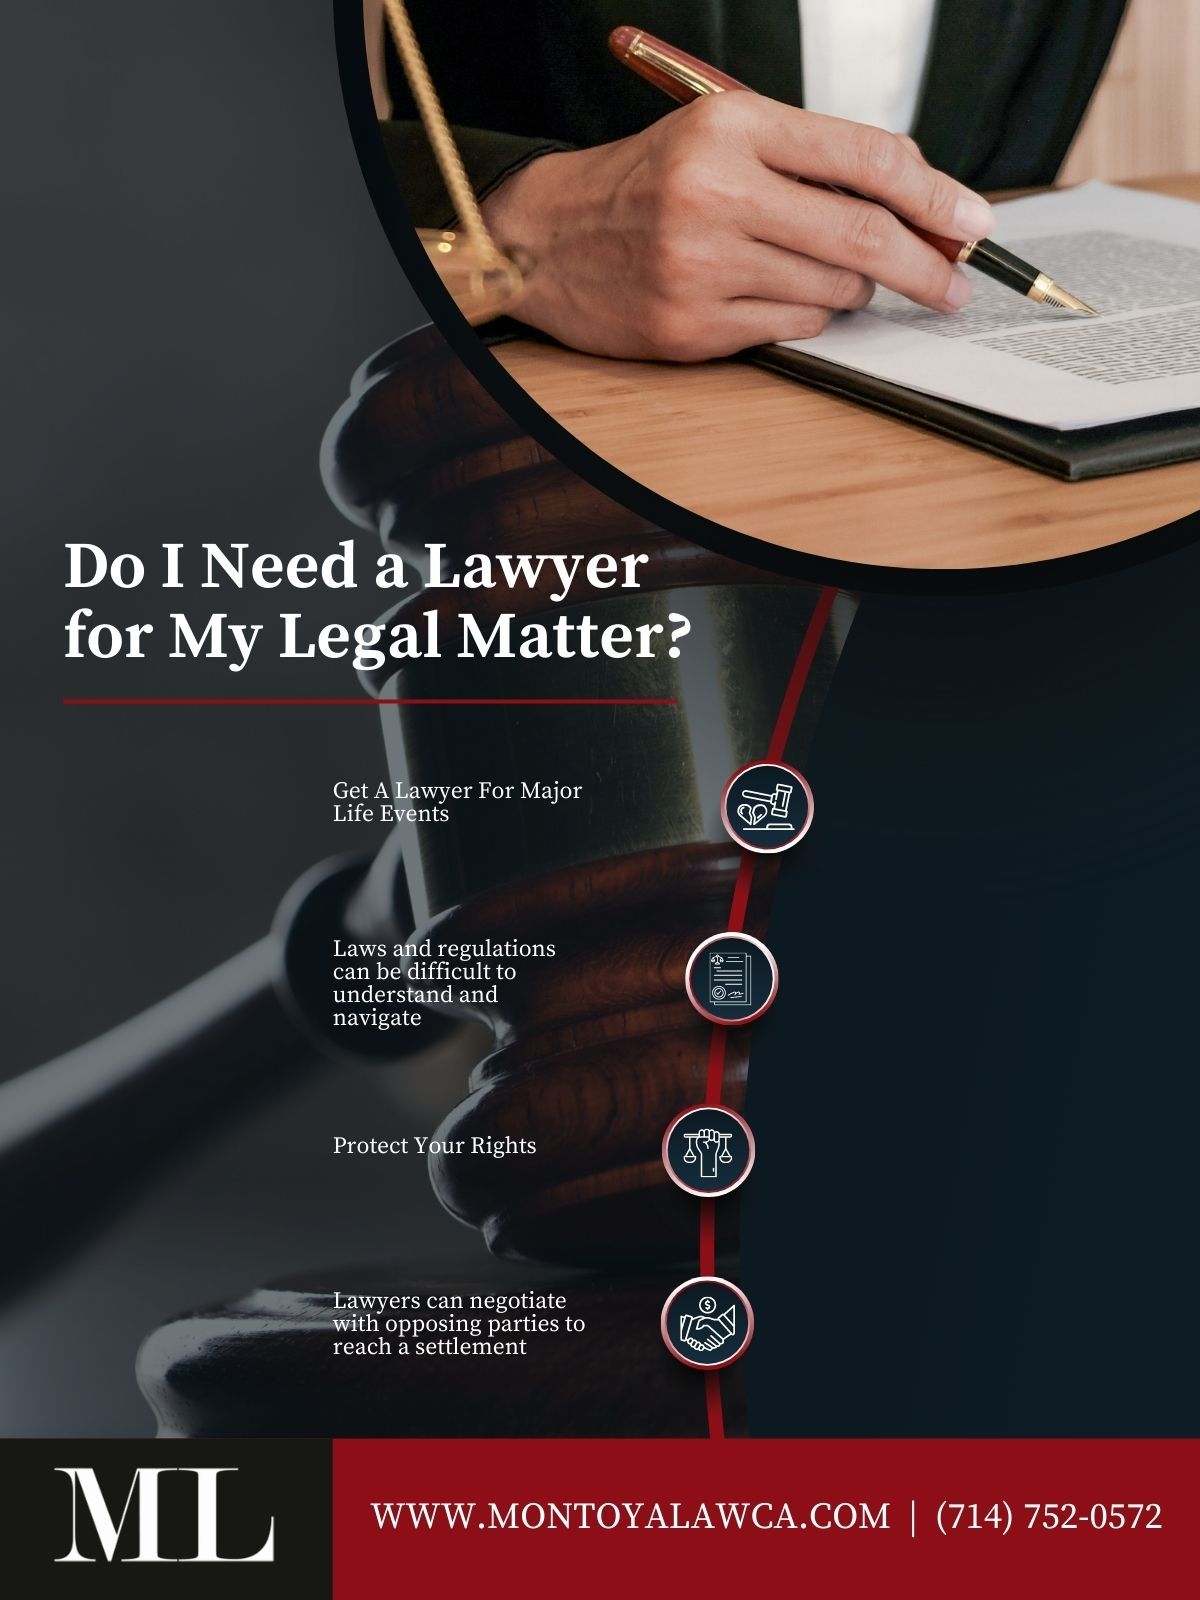 M37918 - infographic - Do I Need a Lawyer for My Legal Matter.jpg